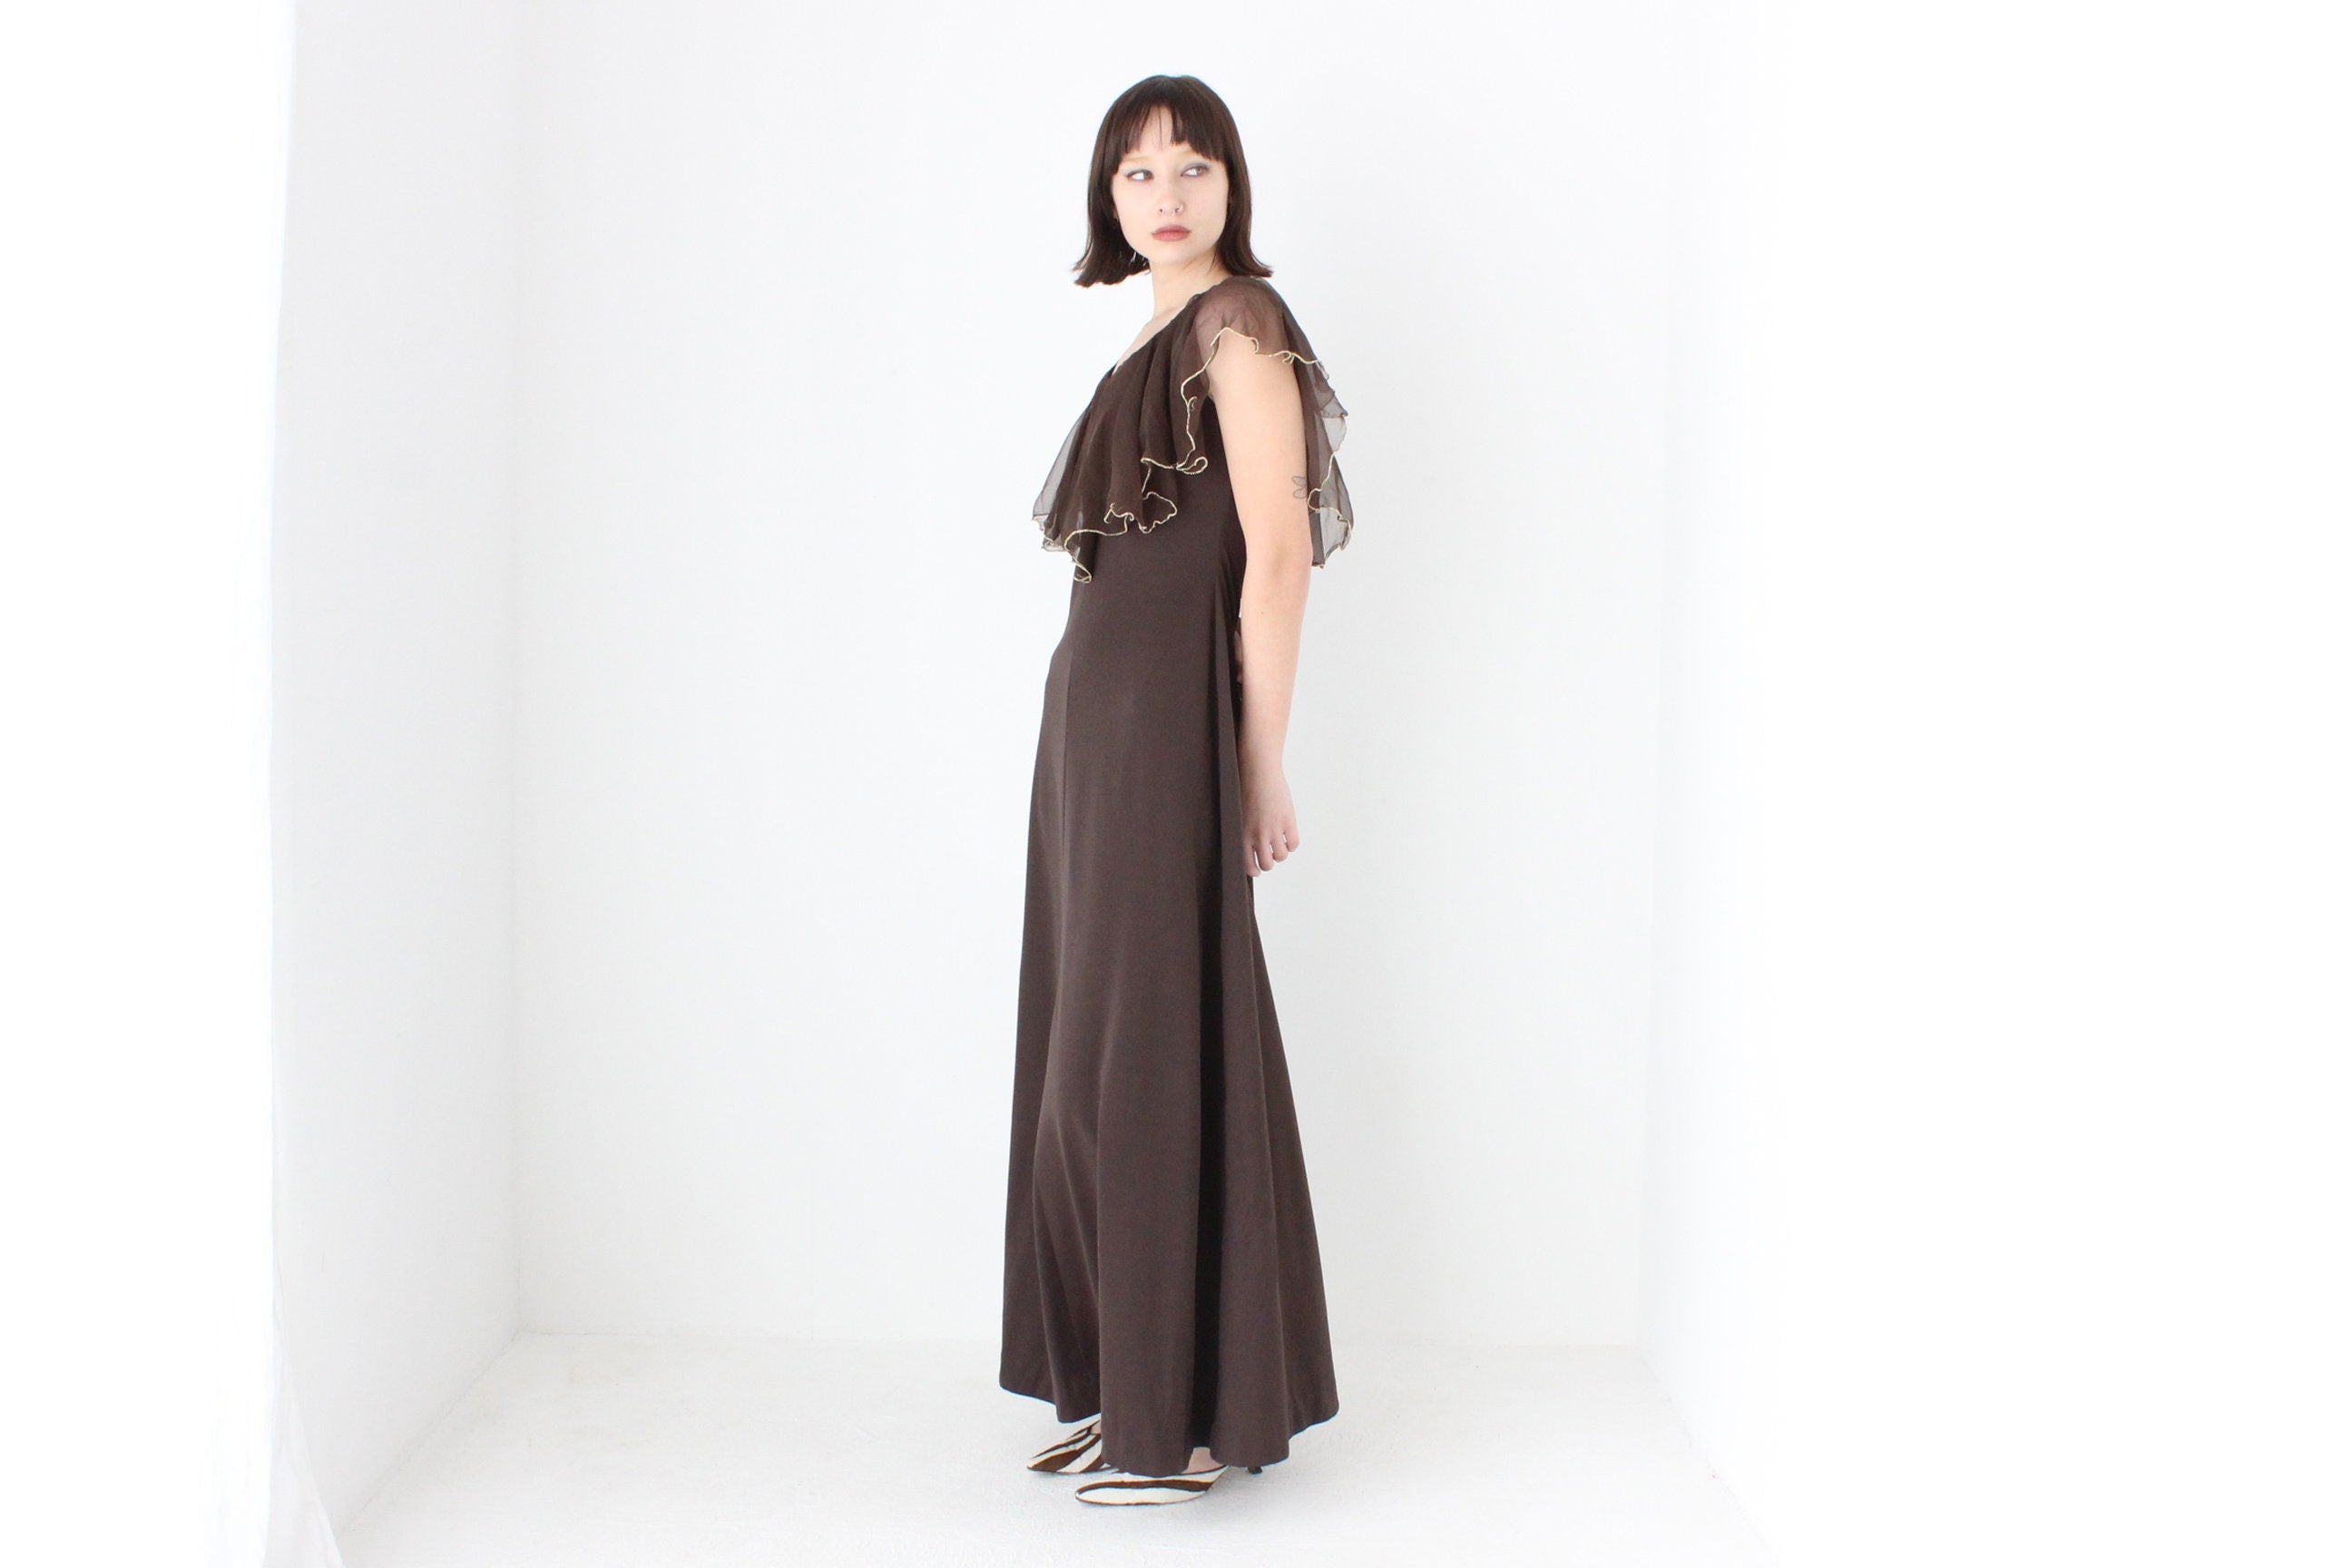 Gorgeous 1970s Chocolate Brown Jersey Gown w/ Ruffle Cape Collar